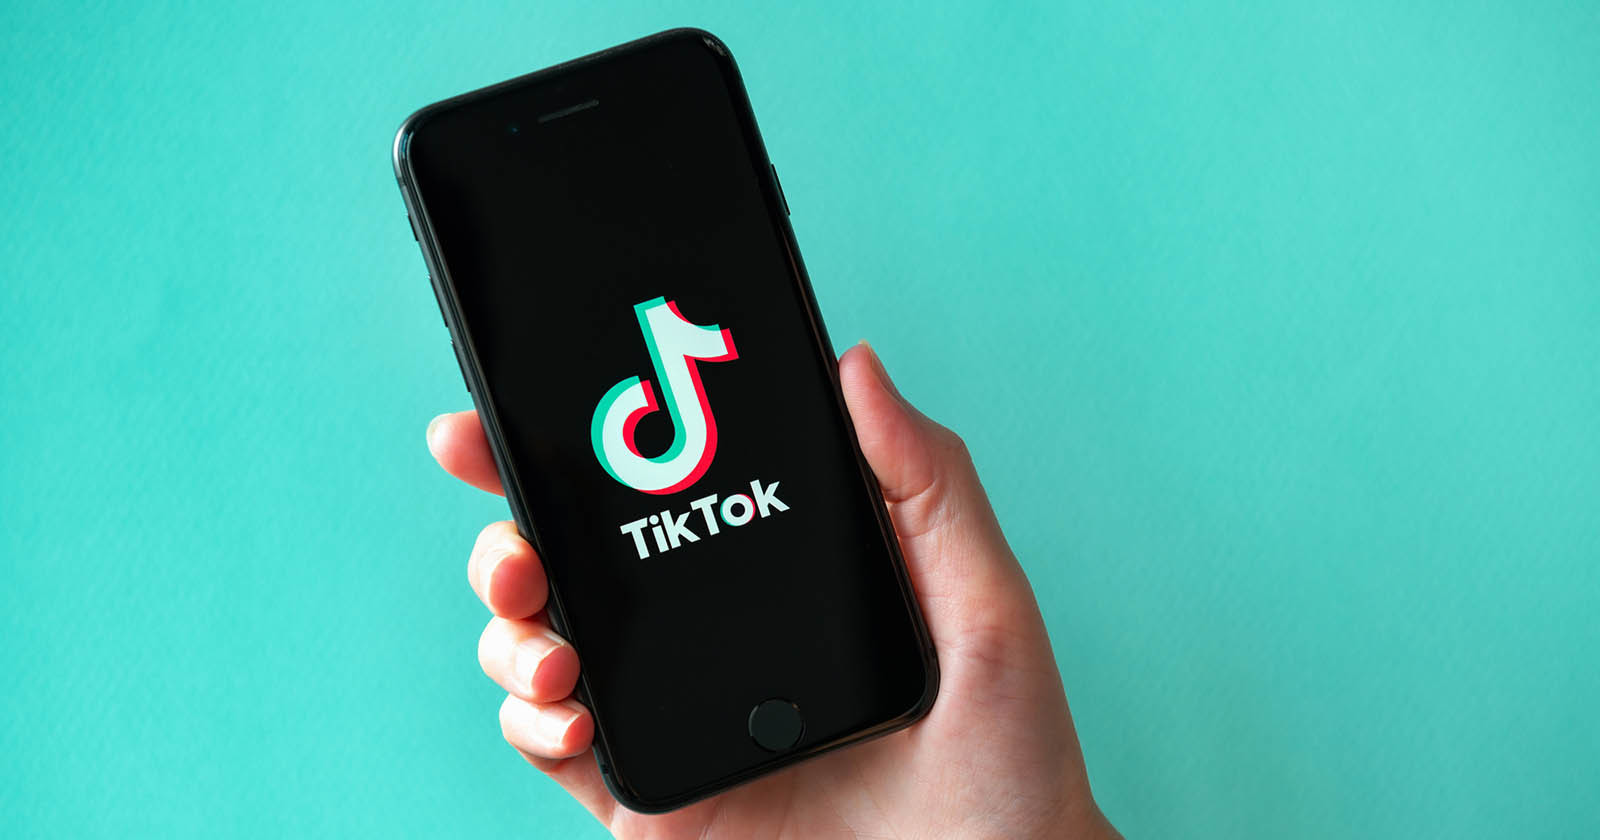 TikTok Denies Breach After Hacking Group Claims to Have Stolen Data